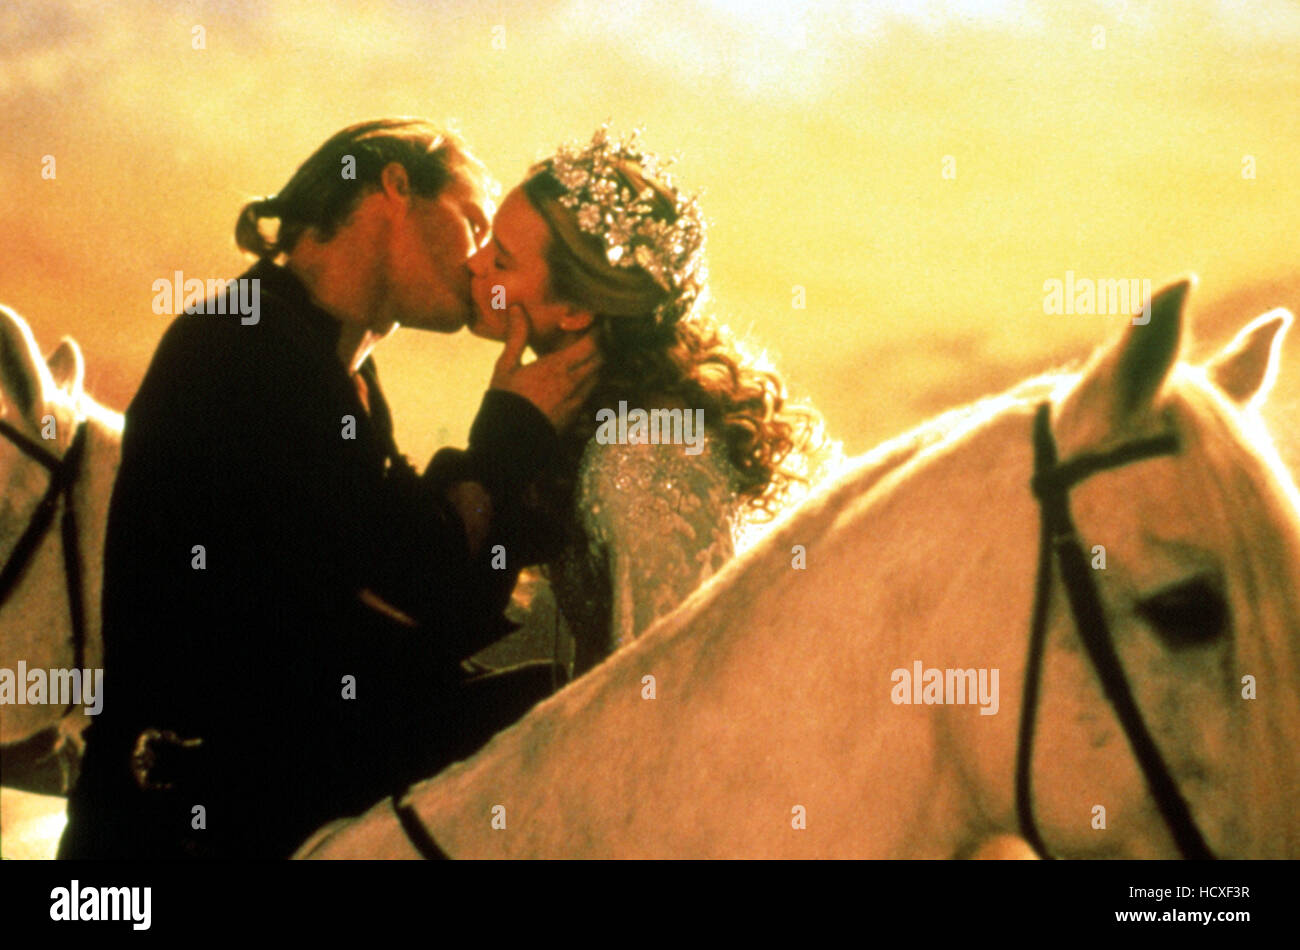 THE PRINCESS BRIDE, Cary Elwes, Robin Wright, 1987, TM & Copyright (c) 20th Century Fox Film Corp. All rights reserved.' Stock Photo